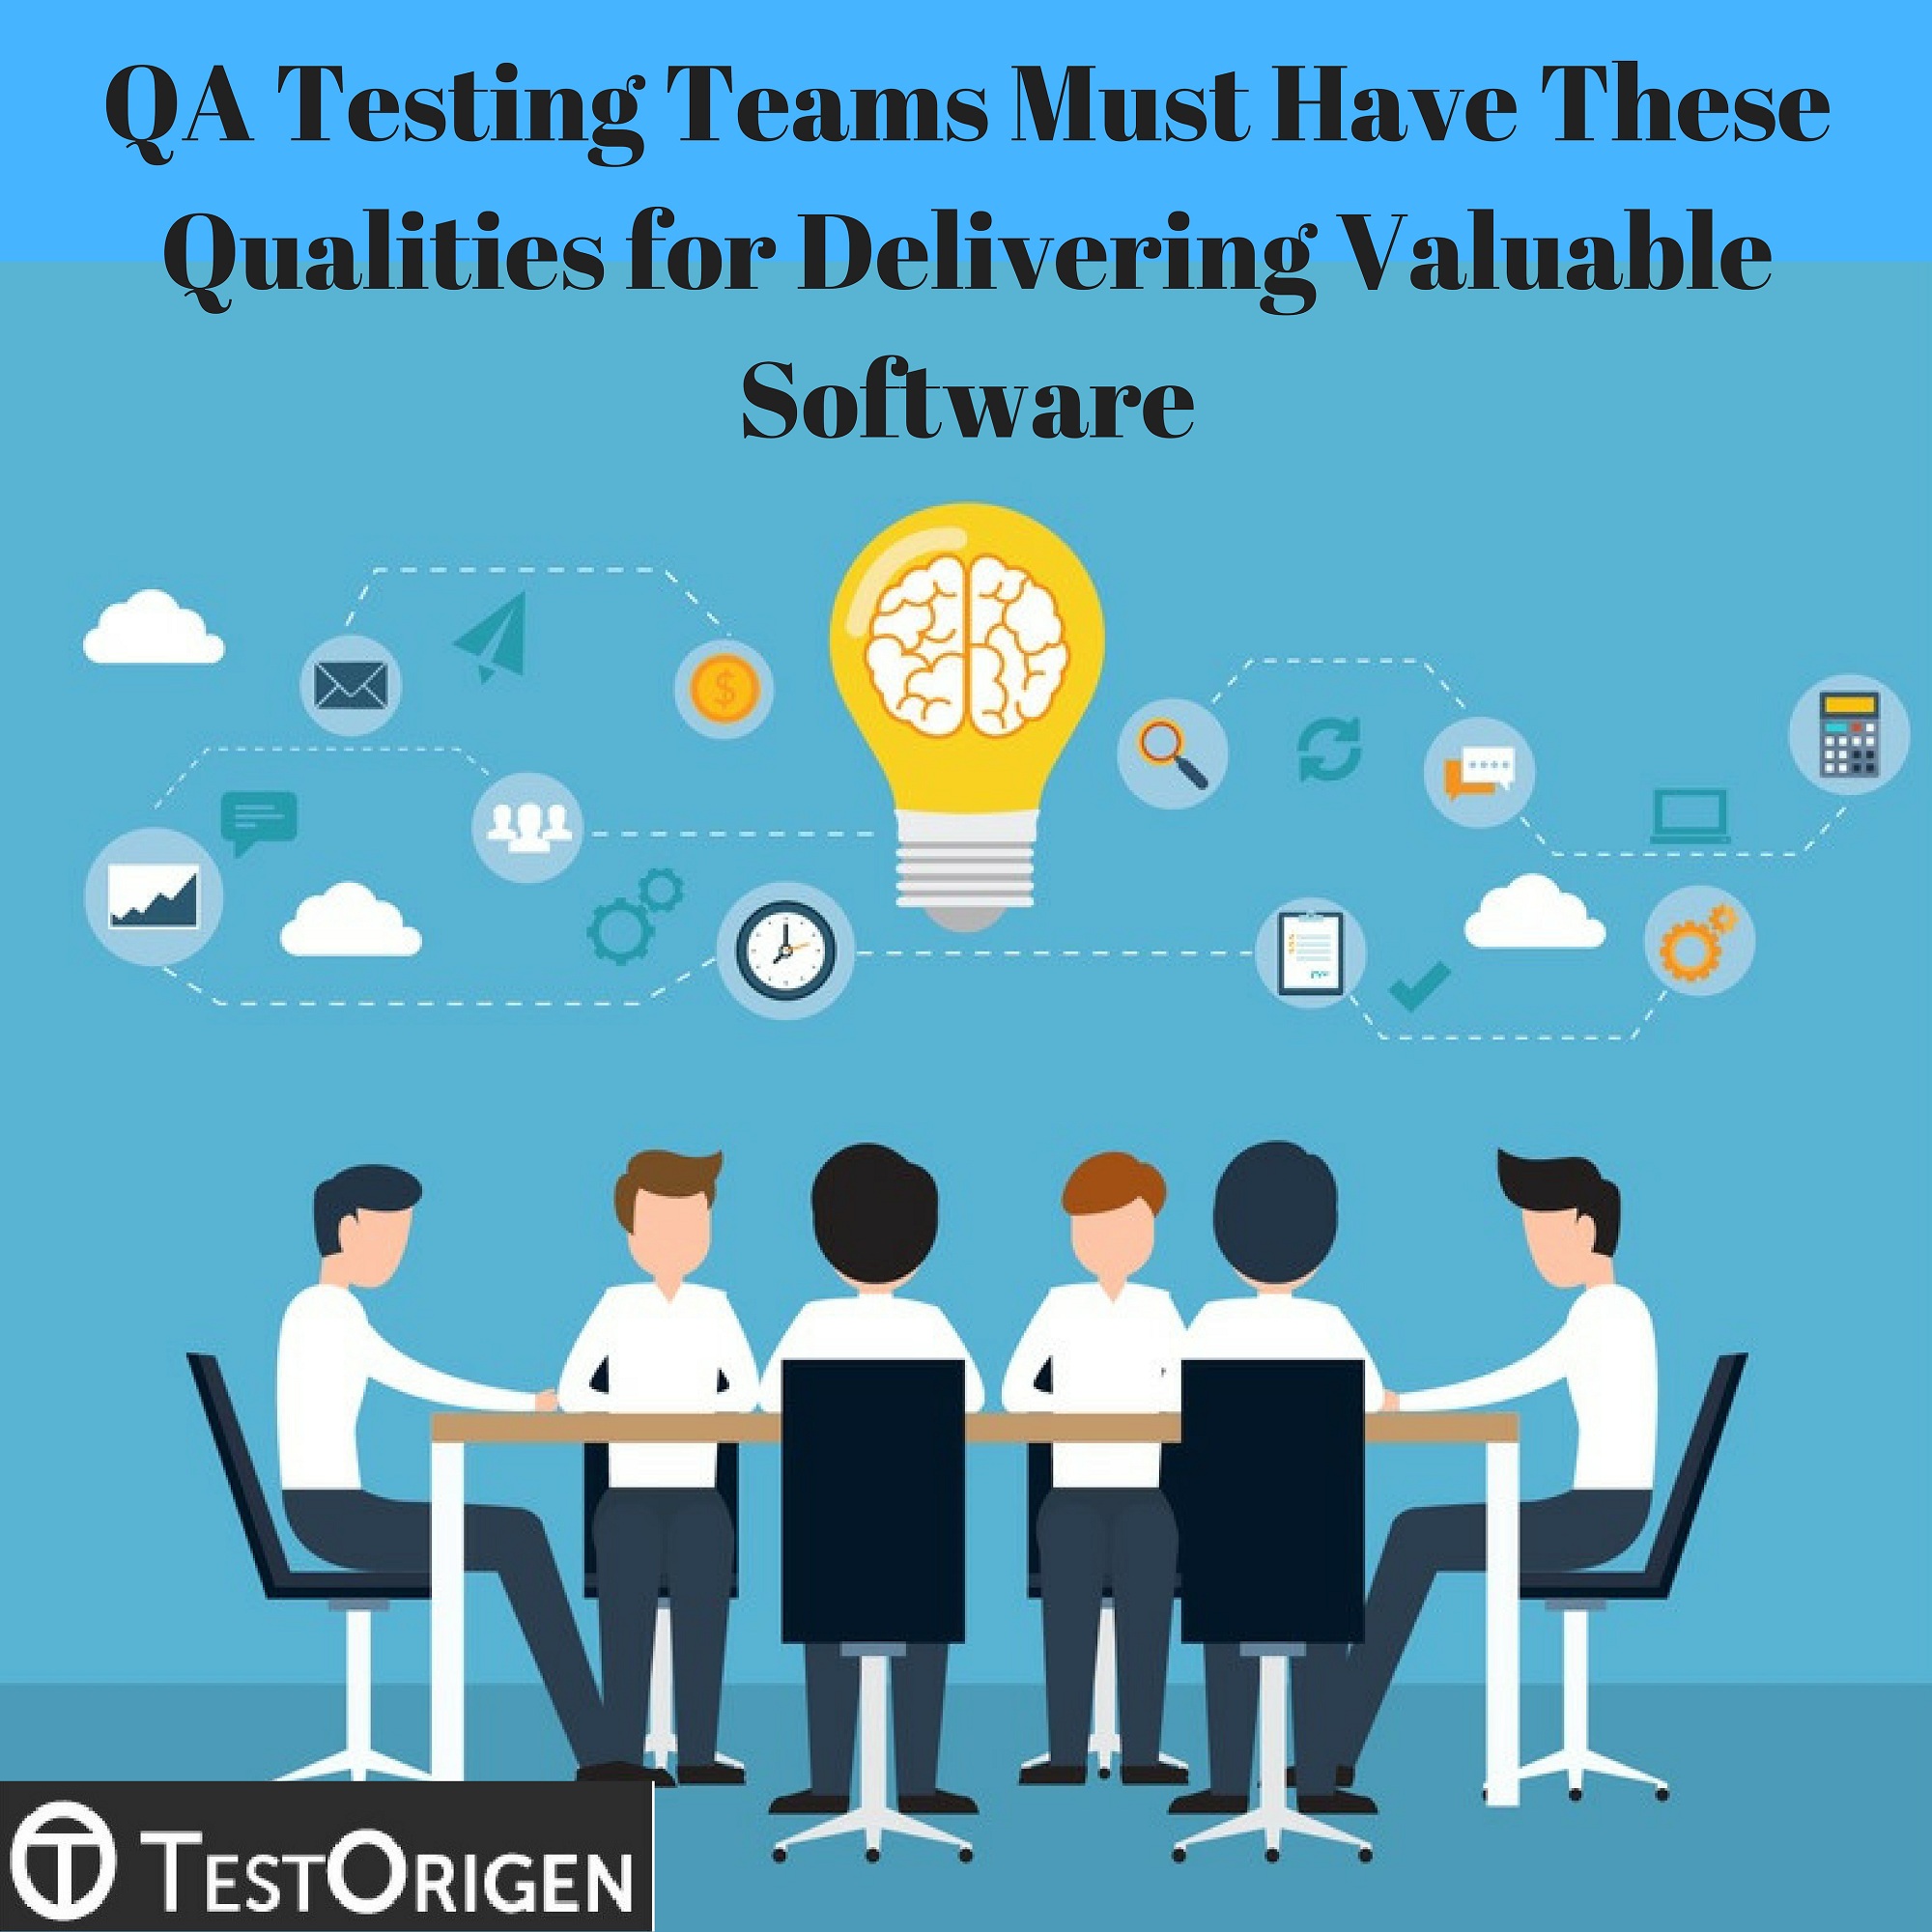 QA Testing Teams Must Have These Qualities for Delivering Valuable Software